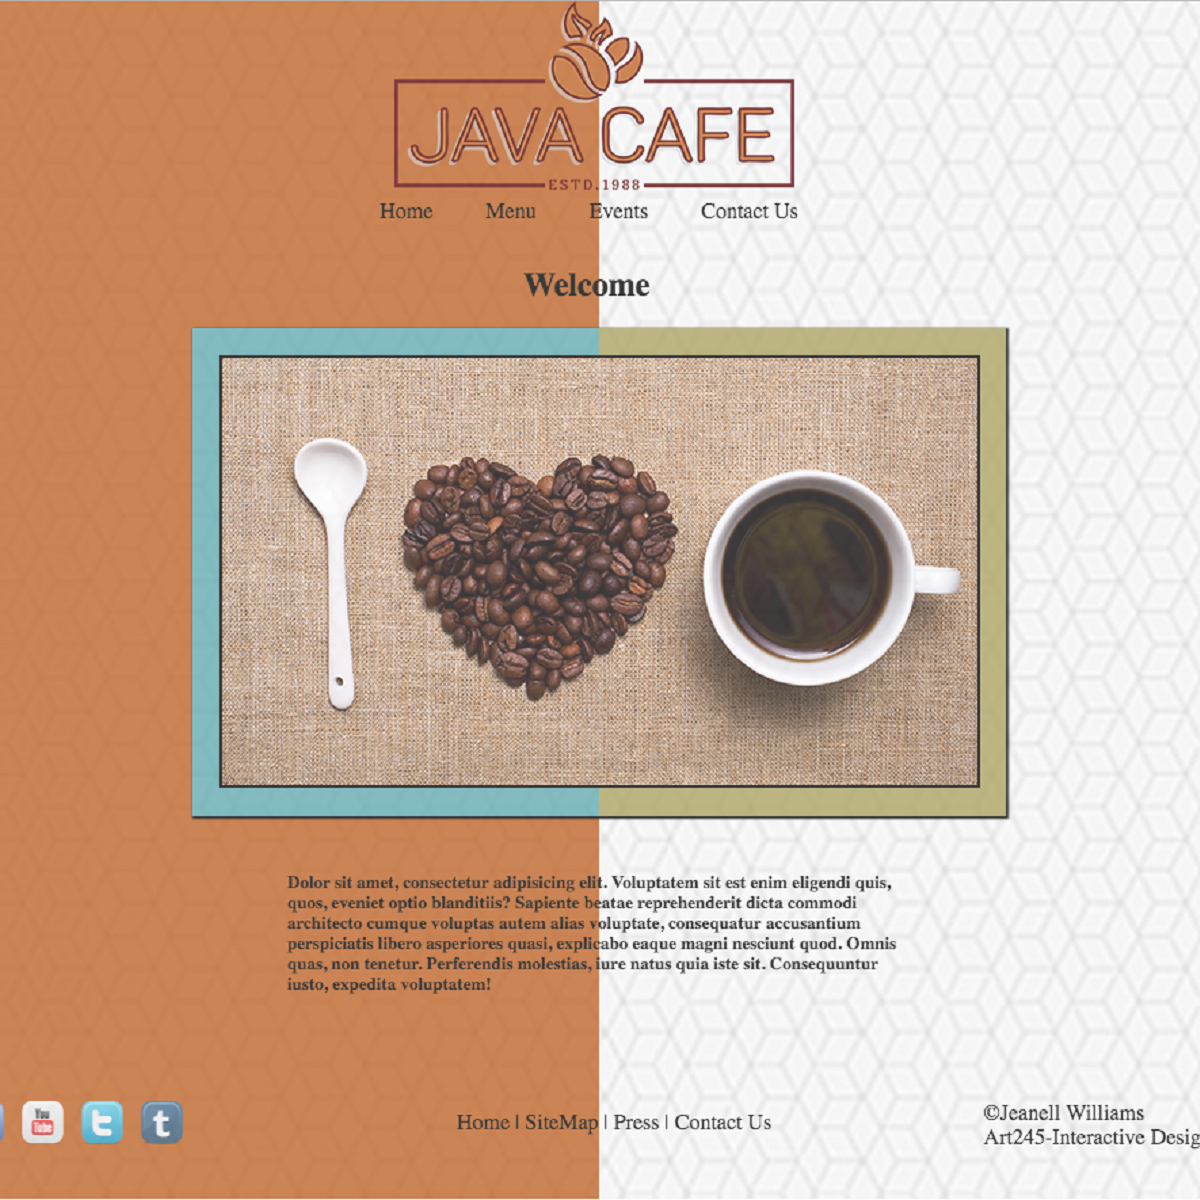 Design of a website front page featuring coffee